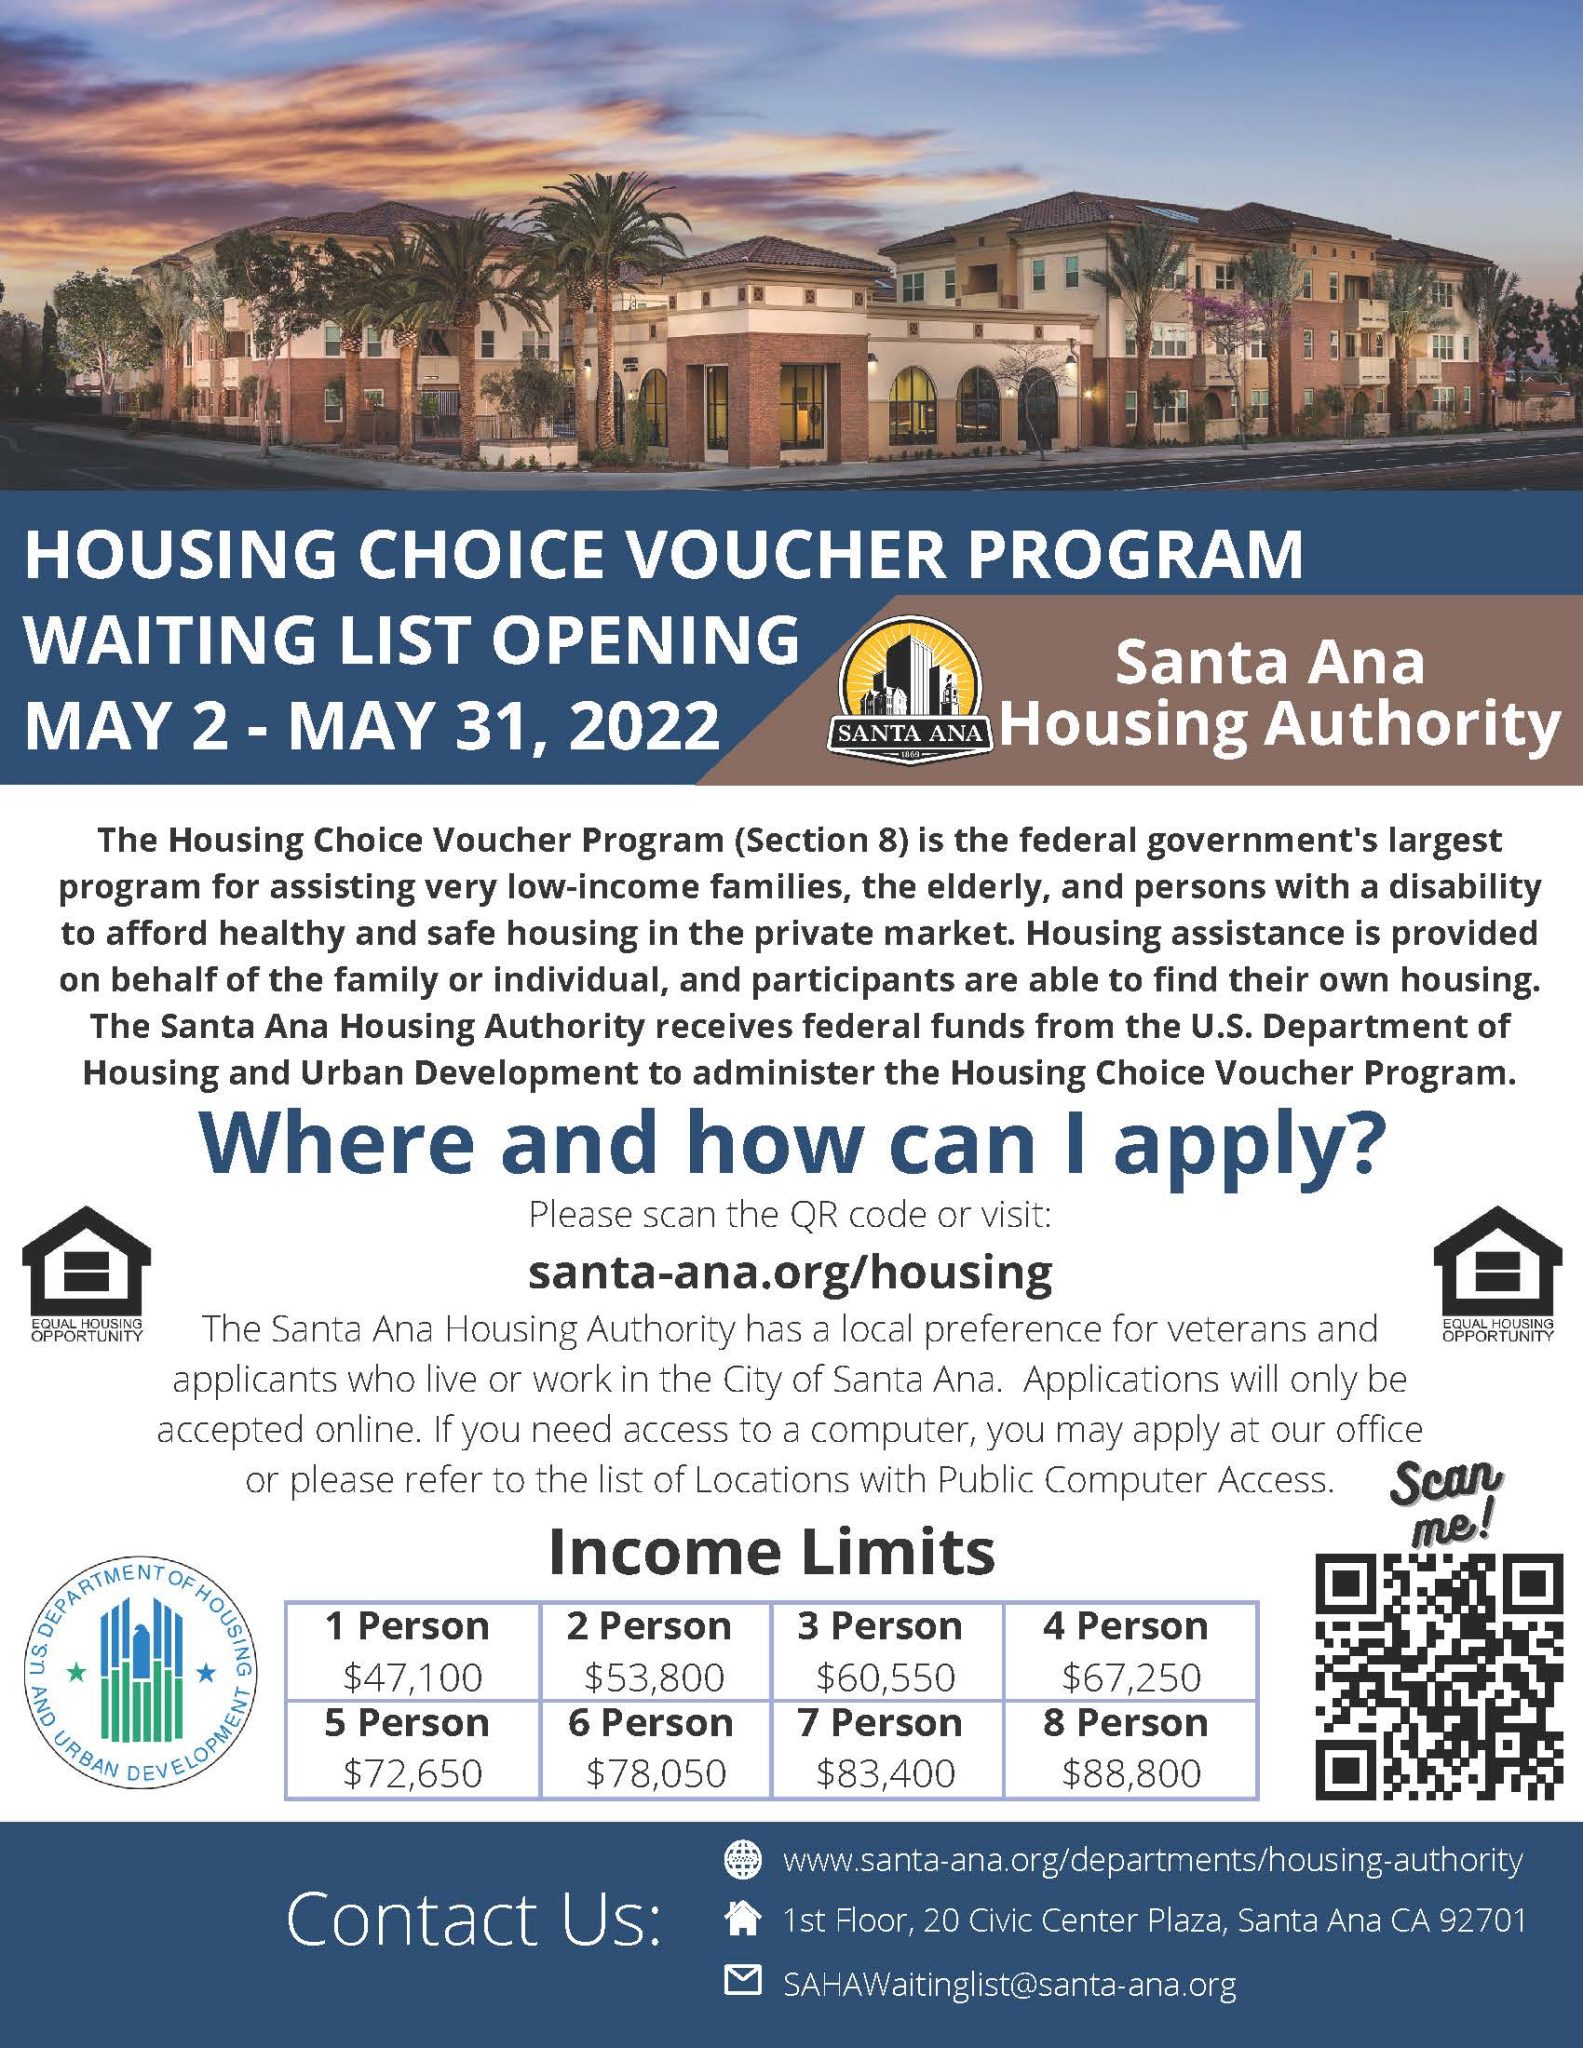 housing-authority-accepting-applications-beginning-may-2-2022-city